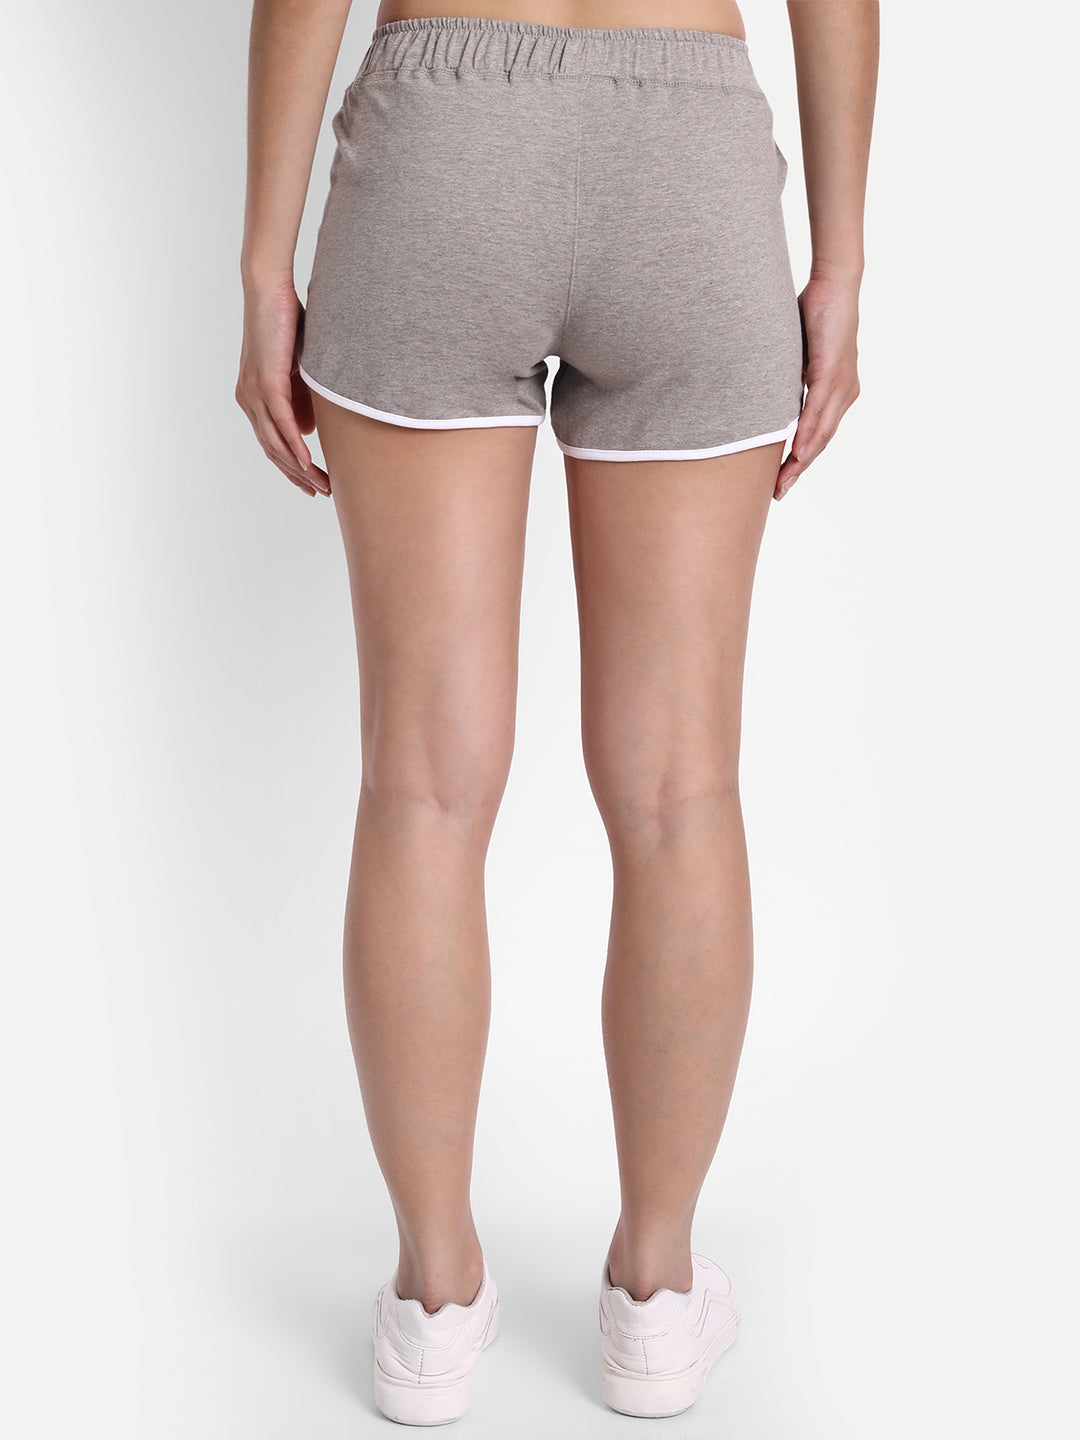 WOMENS GREY POLY COTTON LYCRA SMART FIT SHORTS